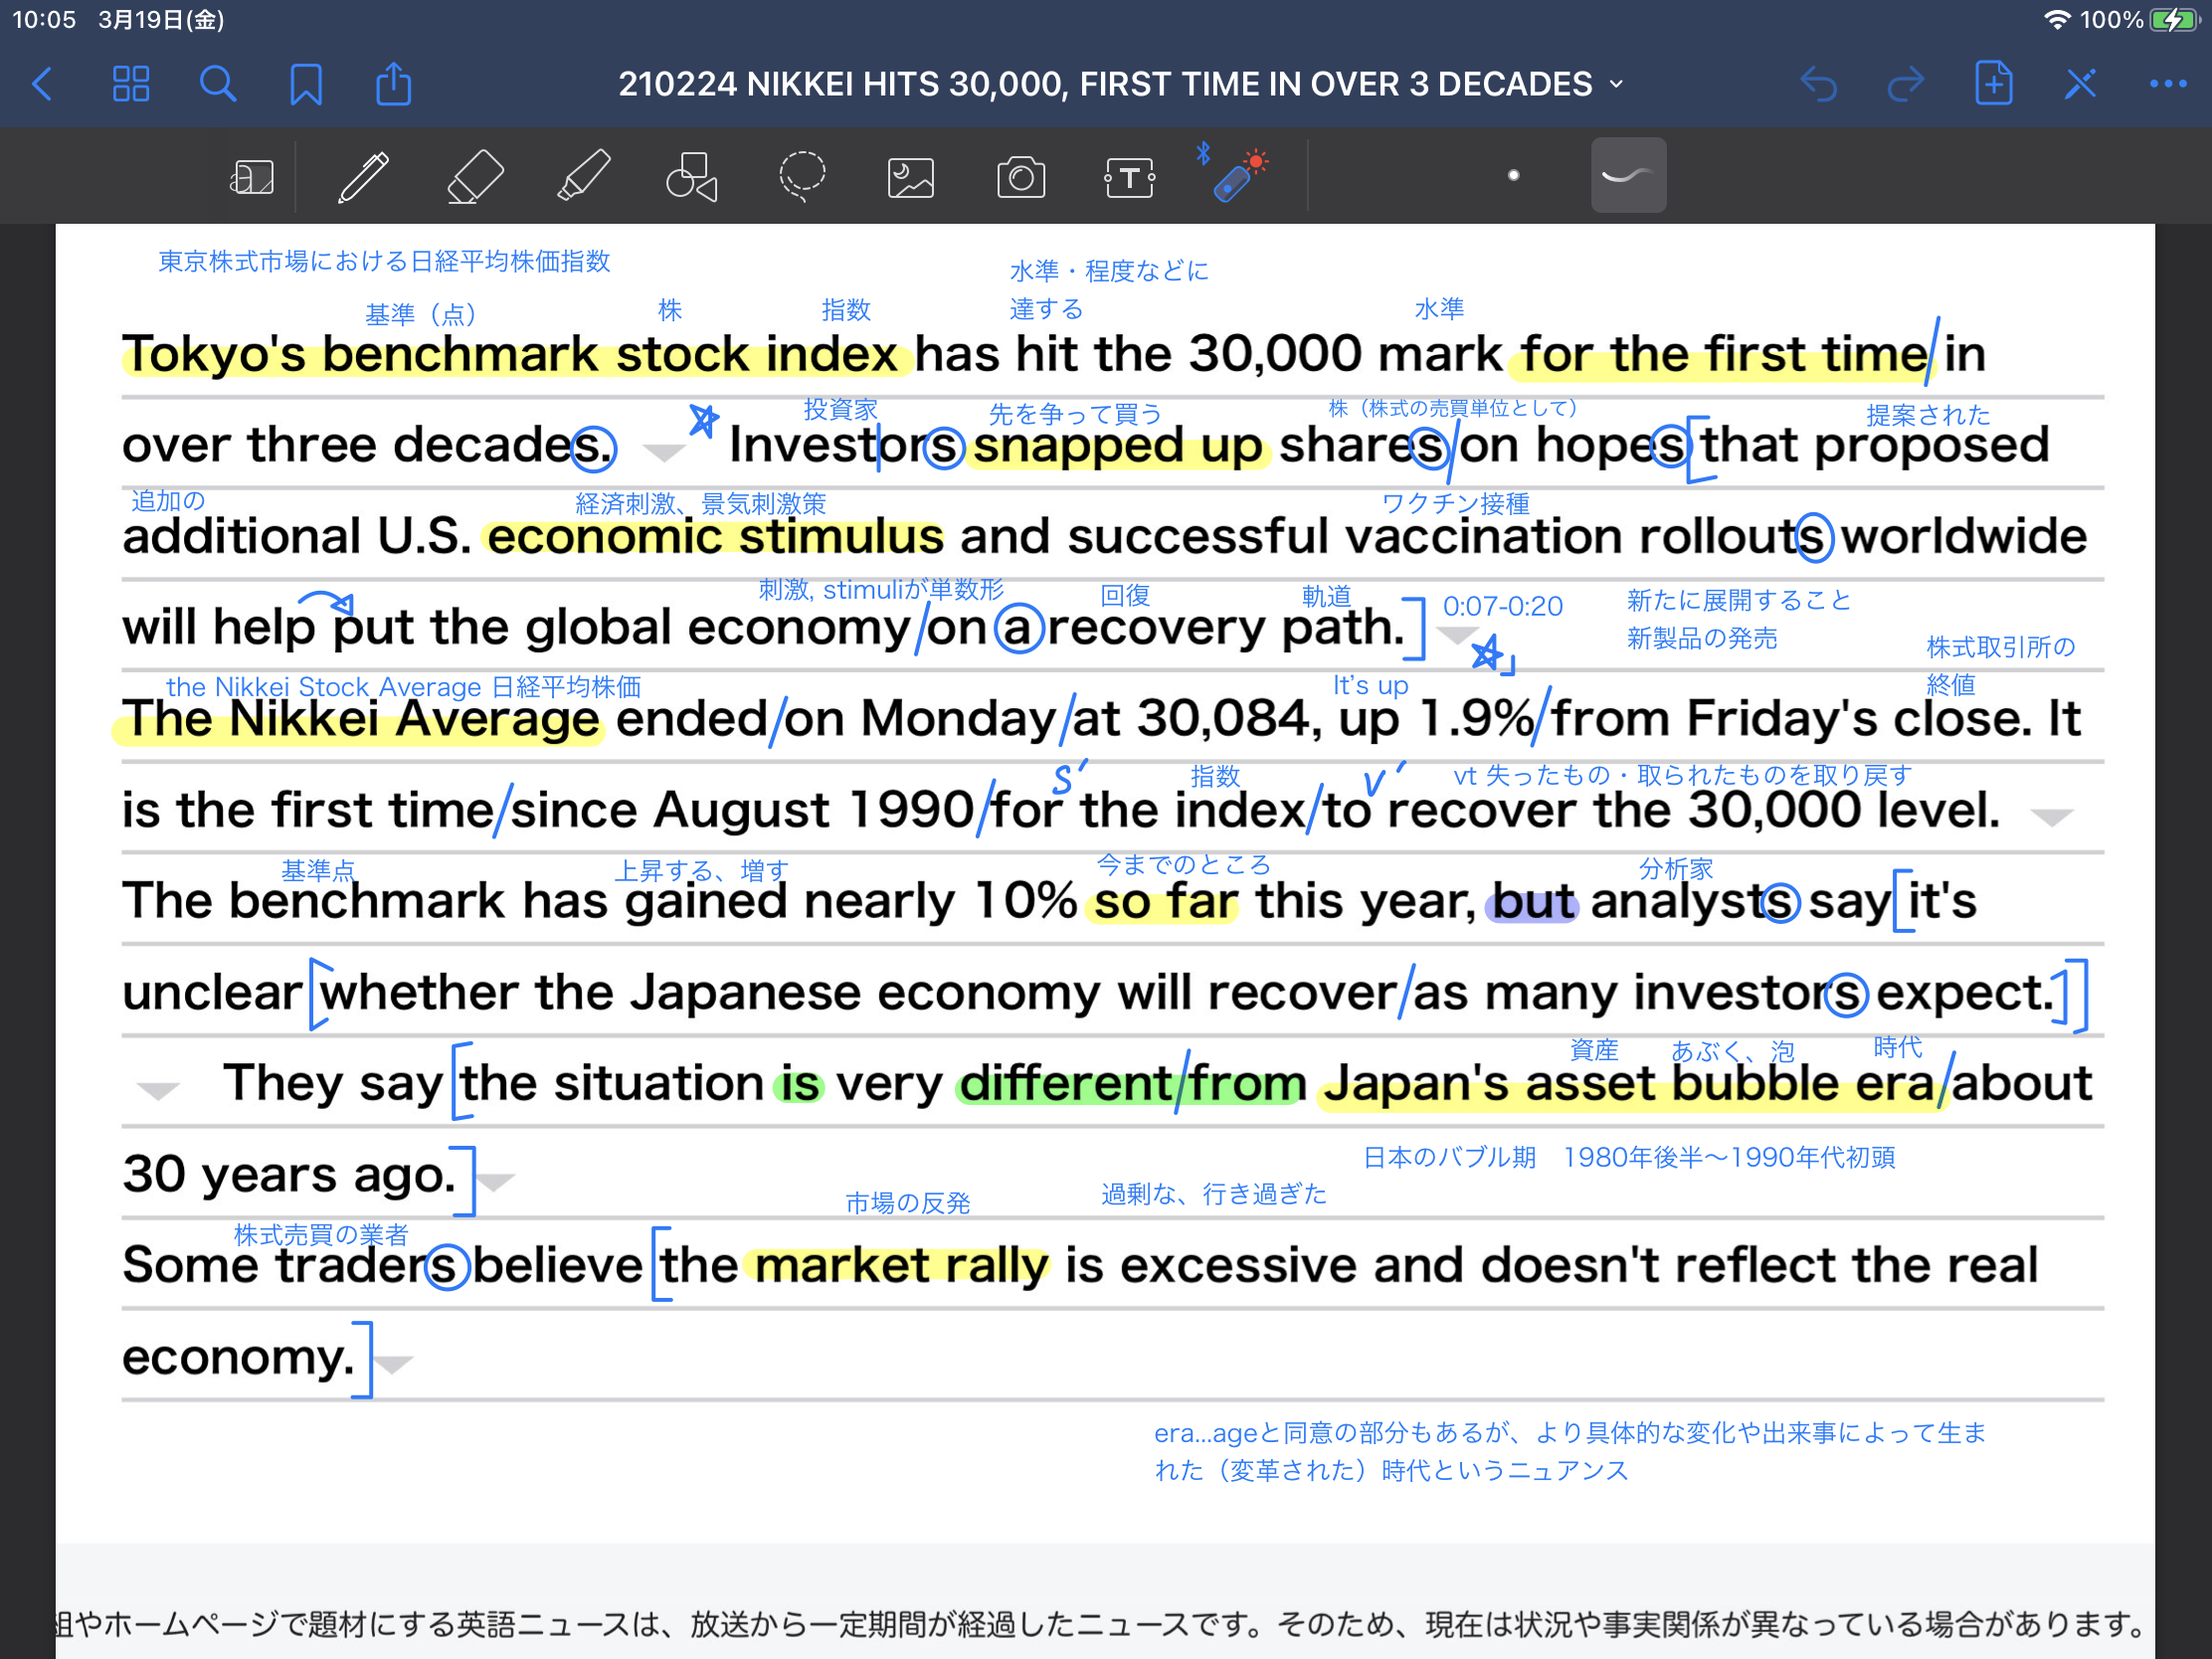 210224 NIKKEI HITS 30,000, FIRST TIME IN OVER 3 DECADES